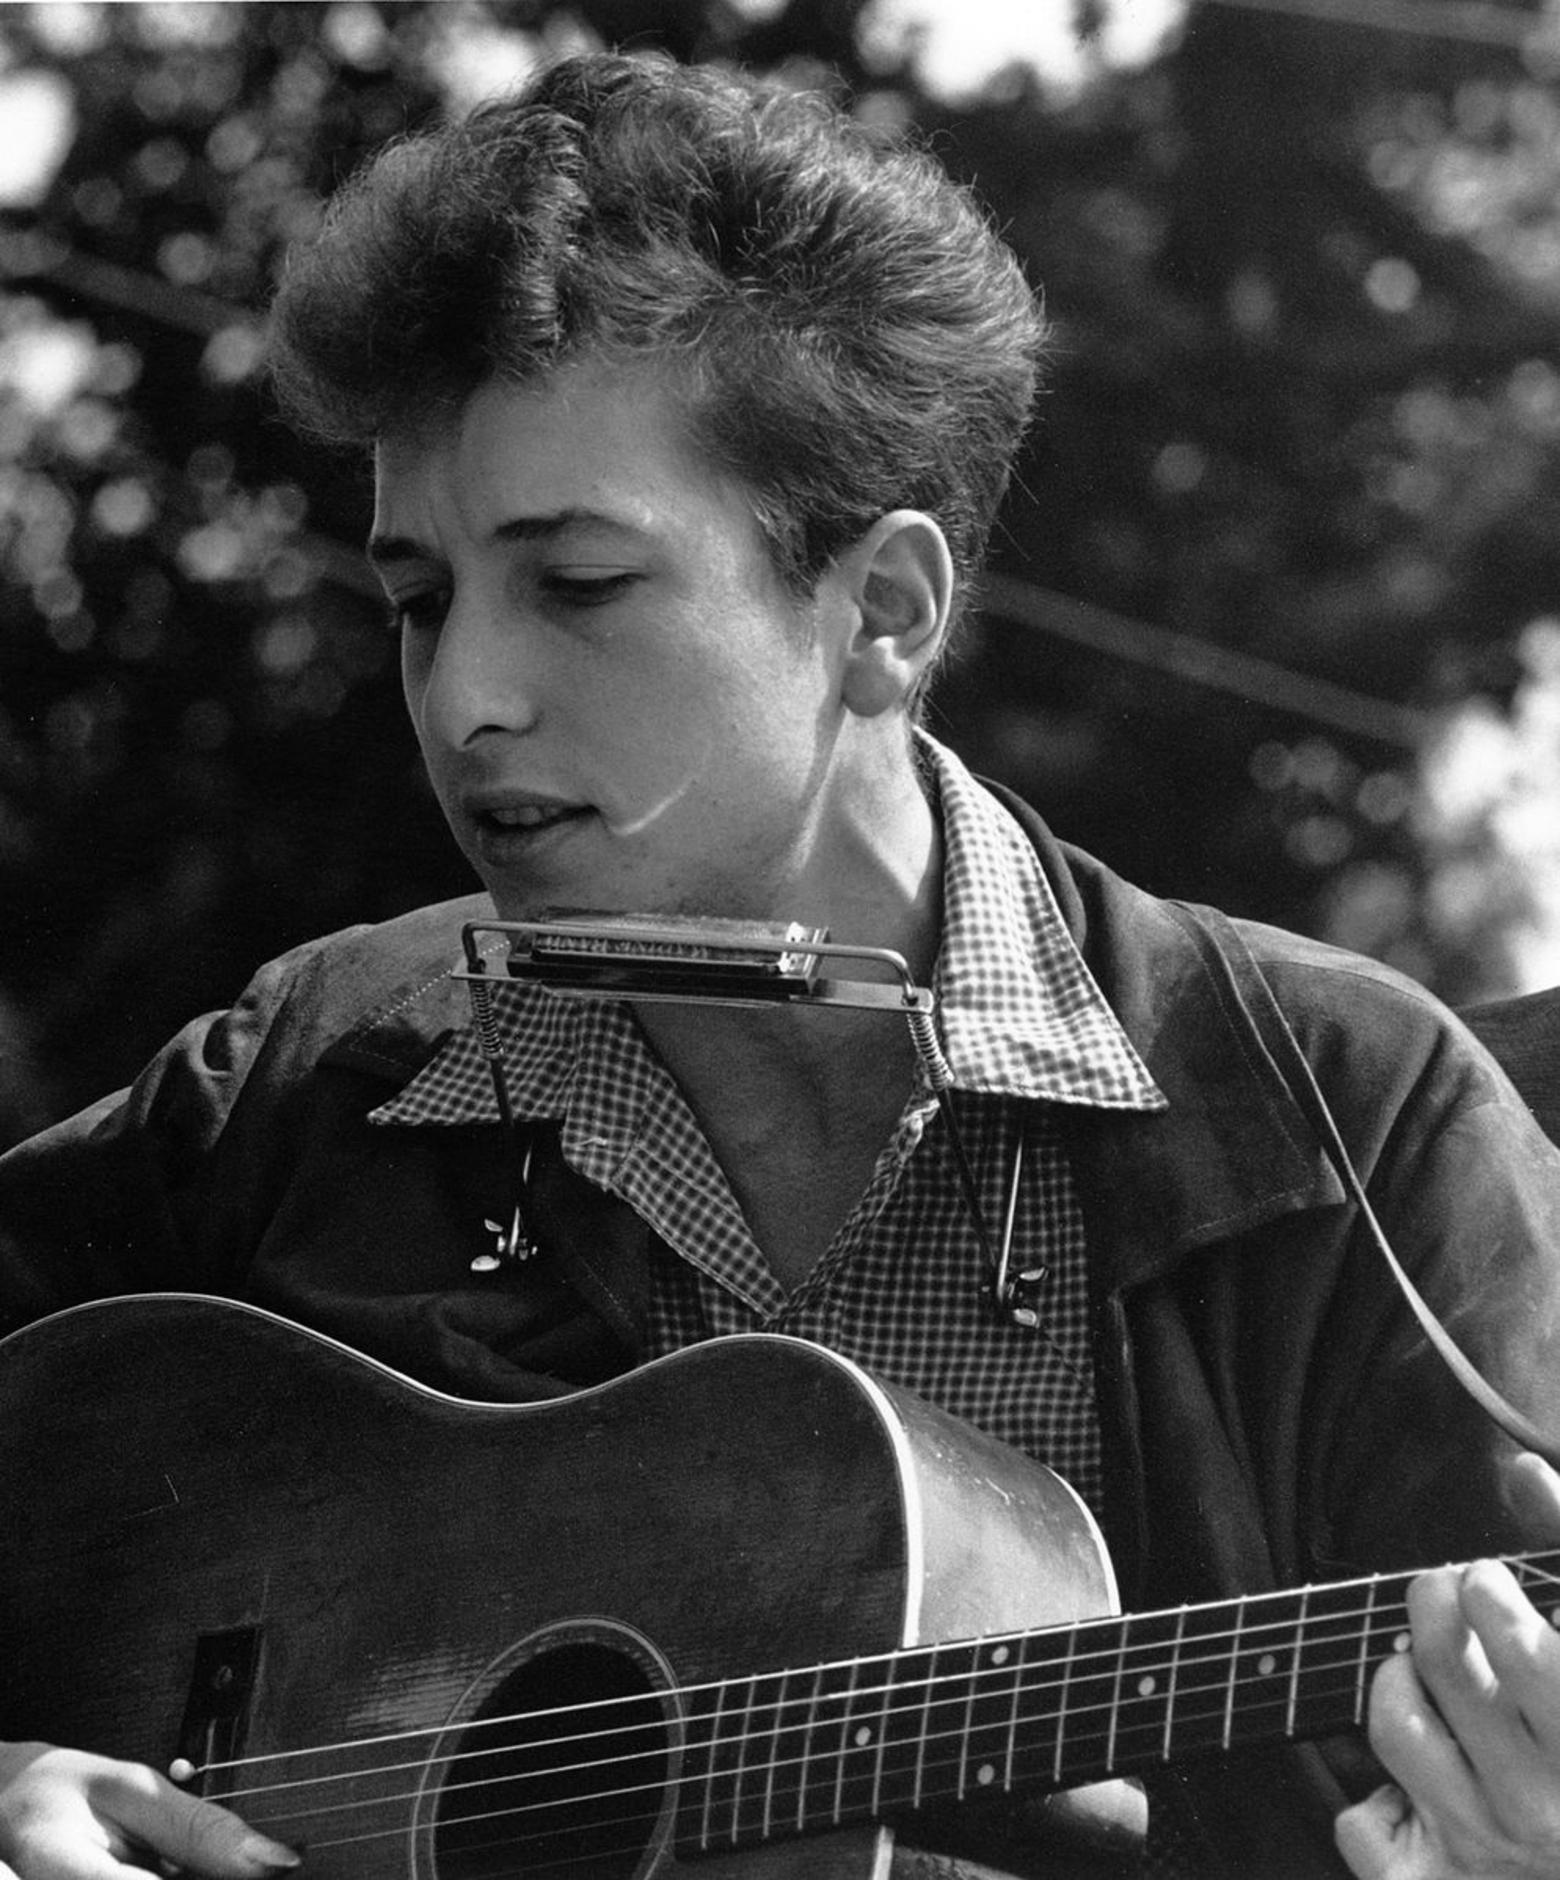 Young Bob Dylan on the verge of becoming a meteoric phenomenon. Next to Joan Baez along the National Mall in Washington DC, he performed at the historic Civil Rights March on August 28, 1963. Photo courtesy National Archives /Records of the US Information Agency